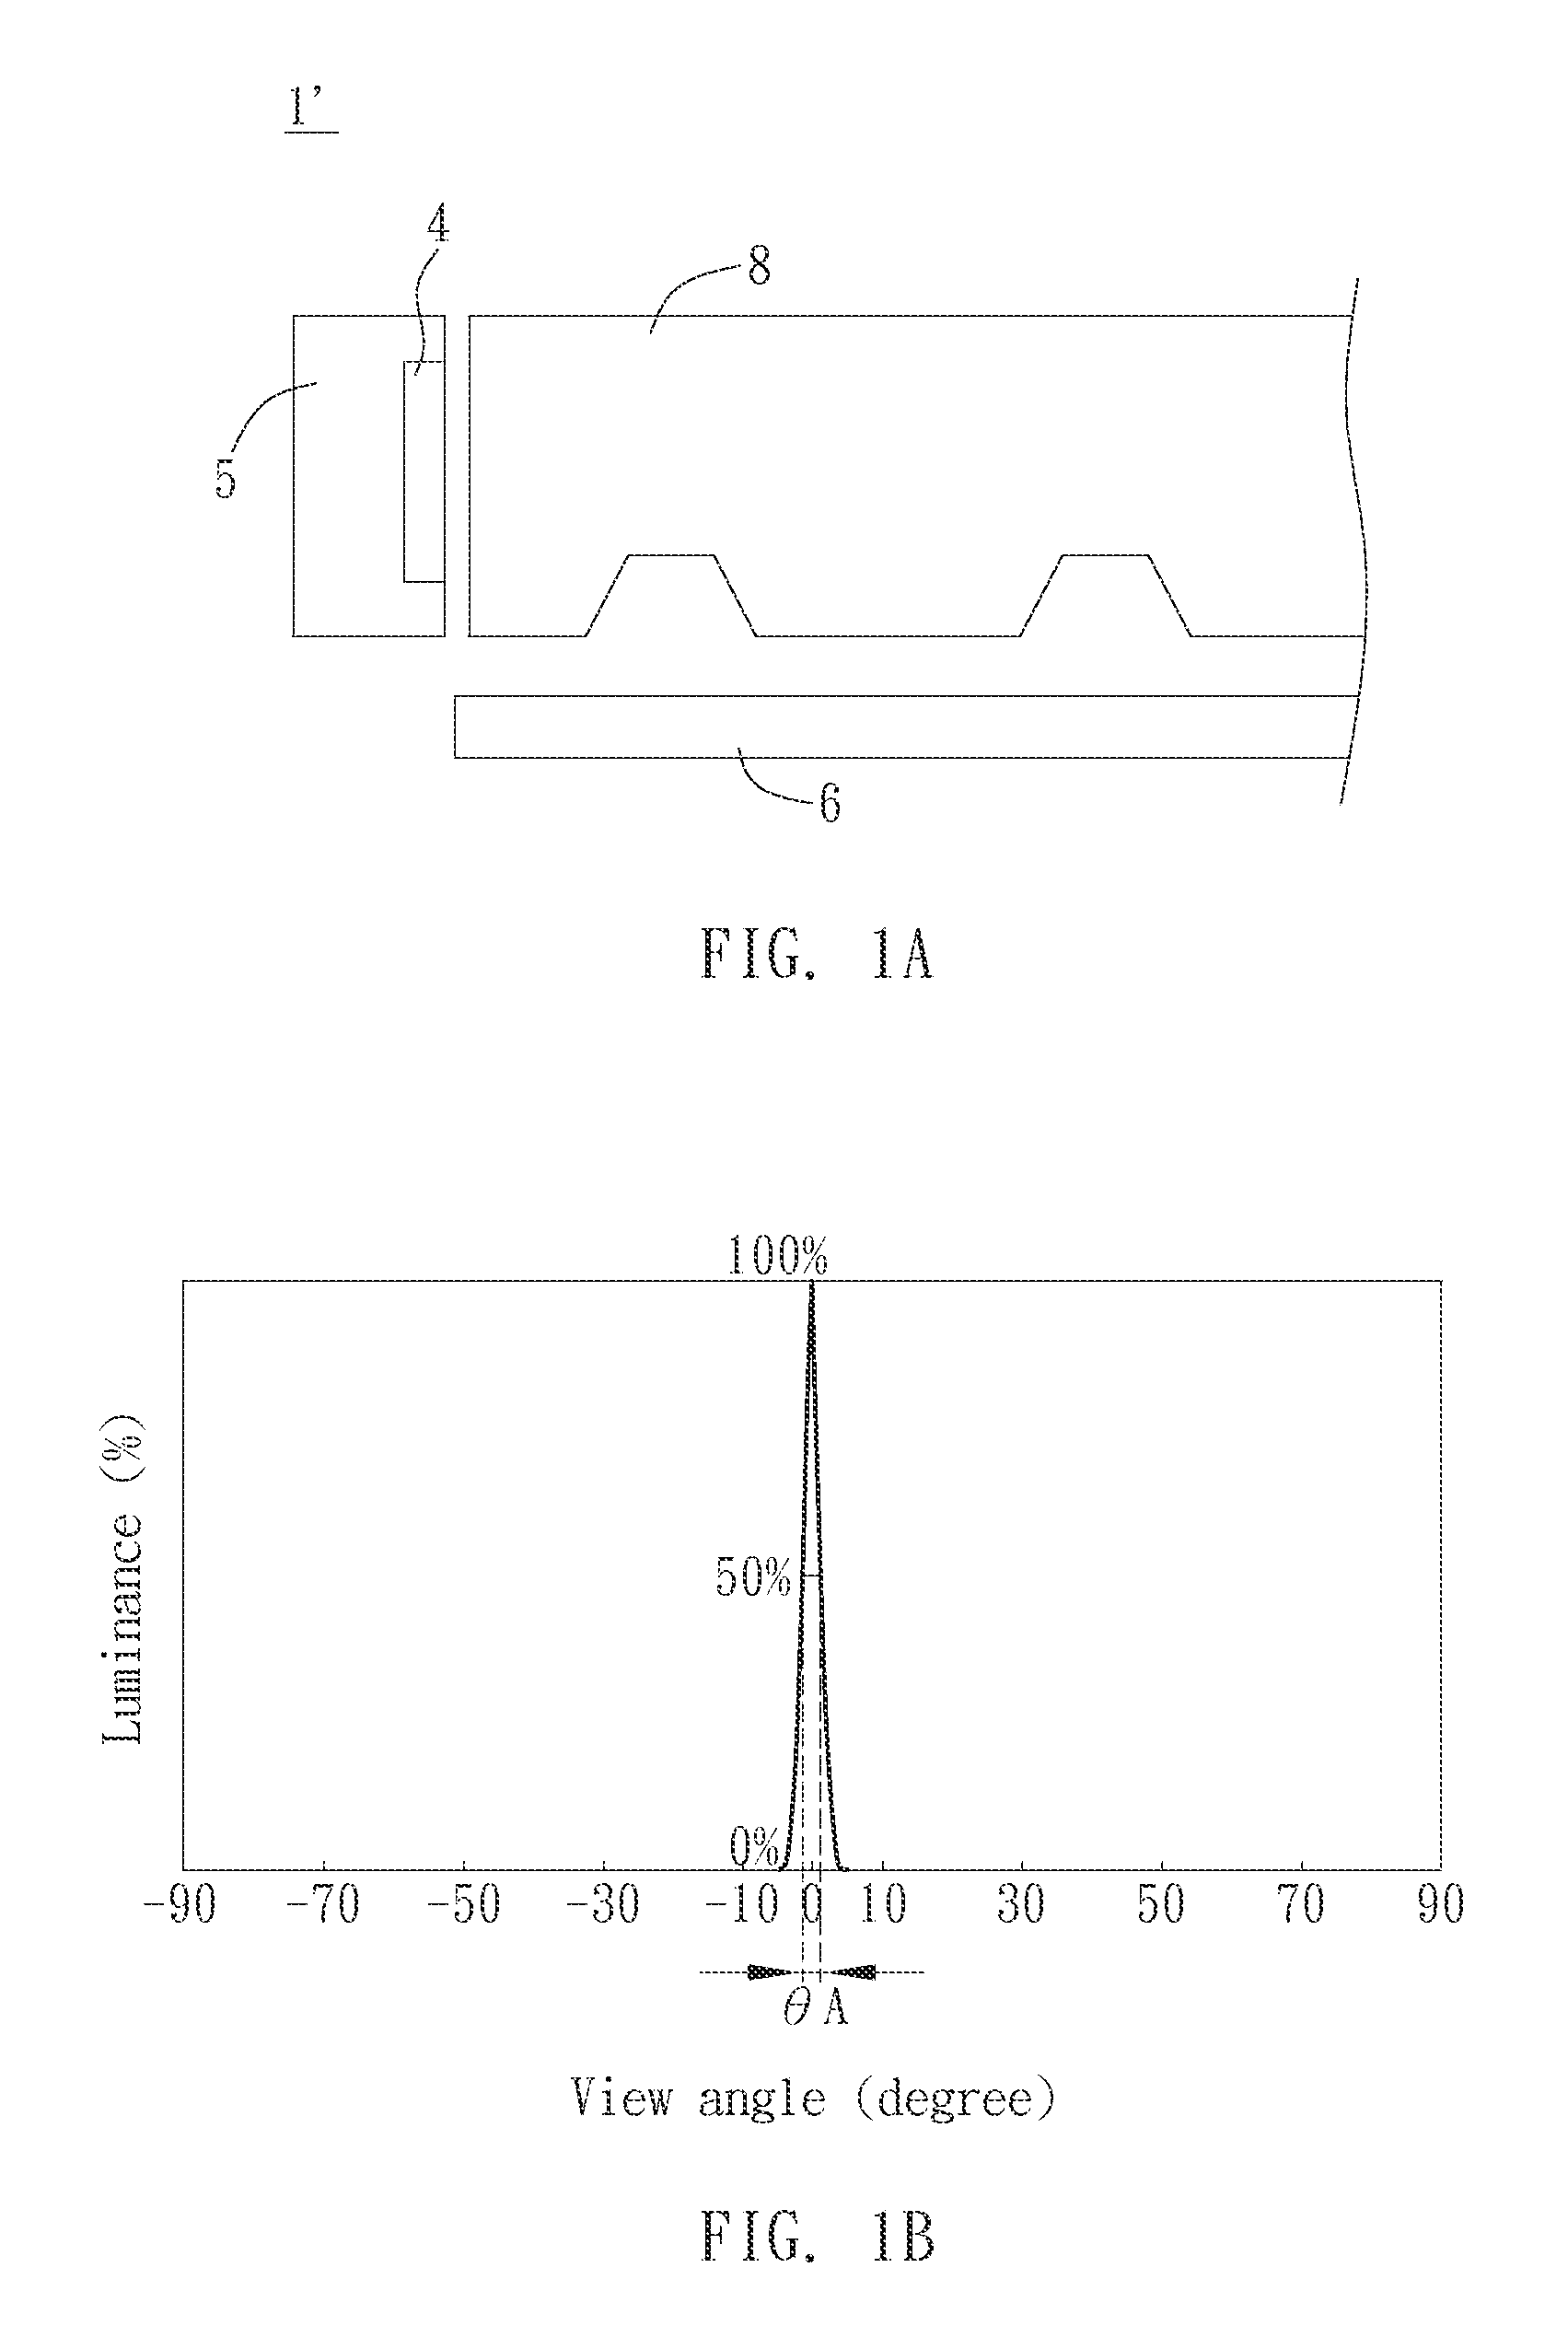 Sheetless Backlight Module, A Light Guide Plate for the Sheetless Backlight and Manufacturing Method Thereof